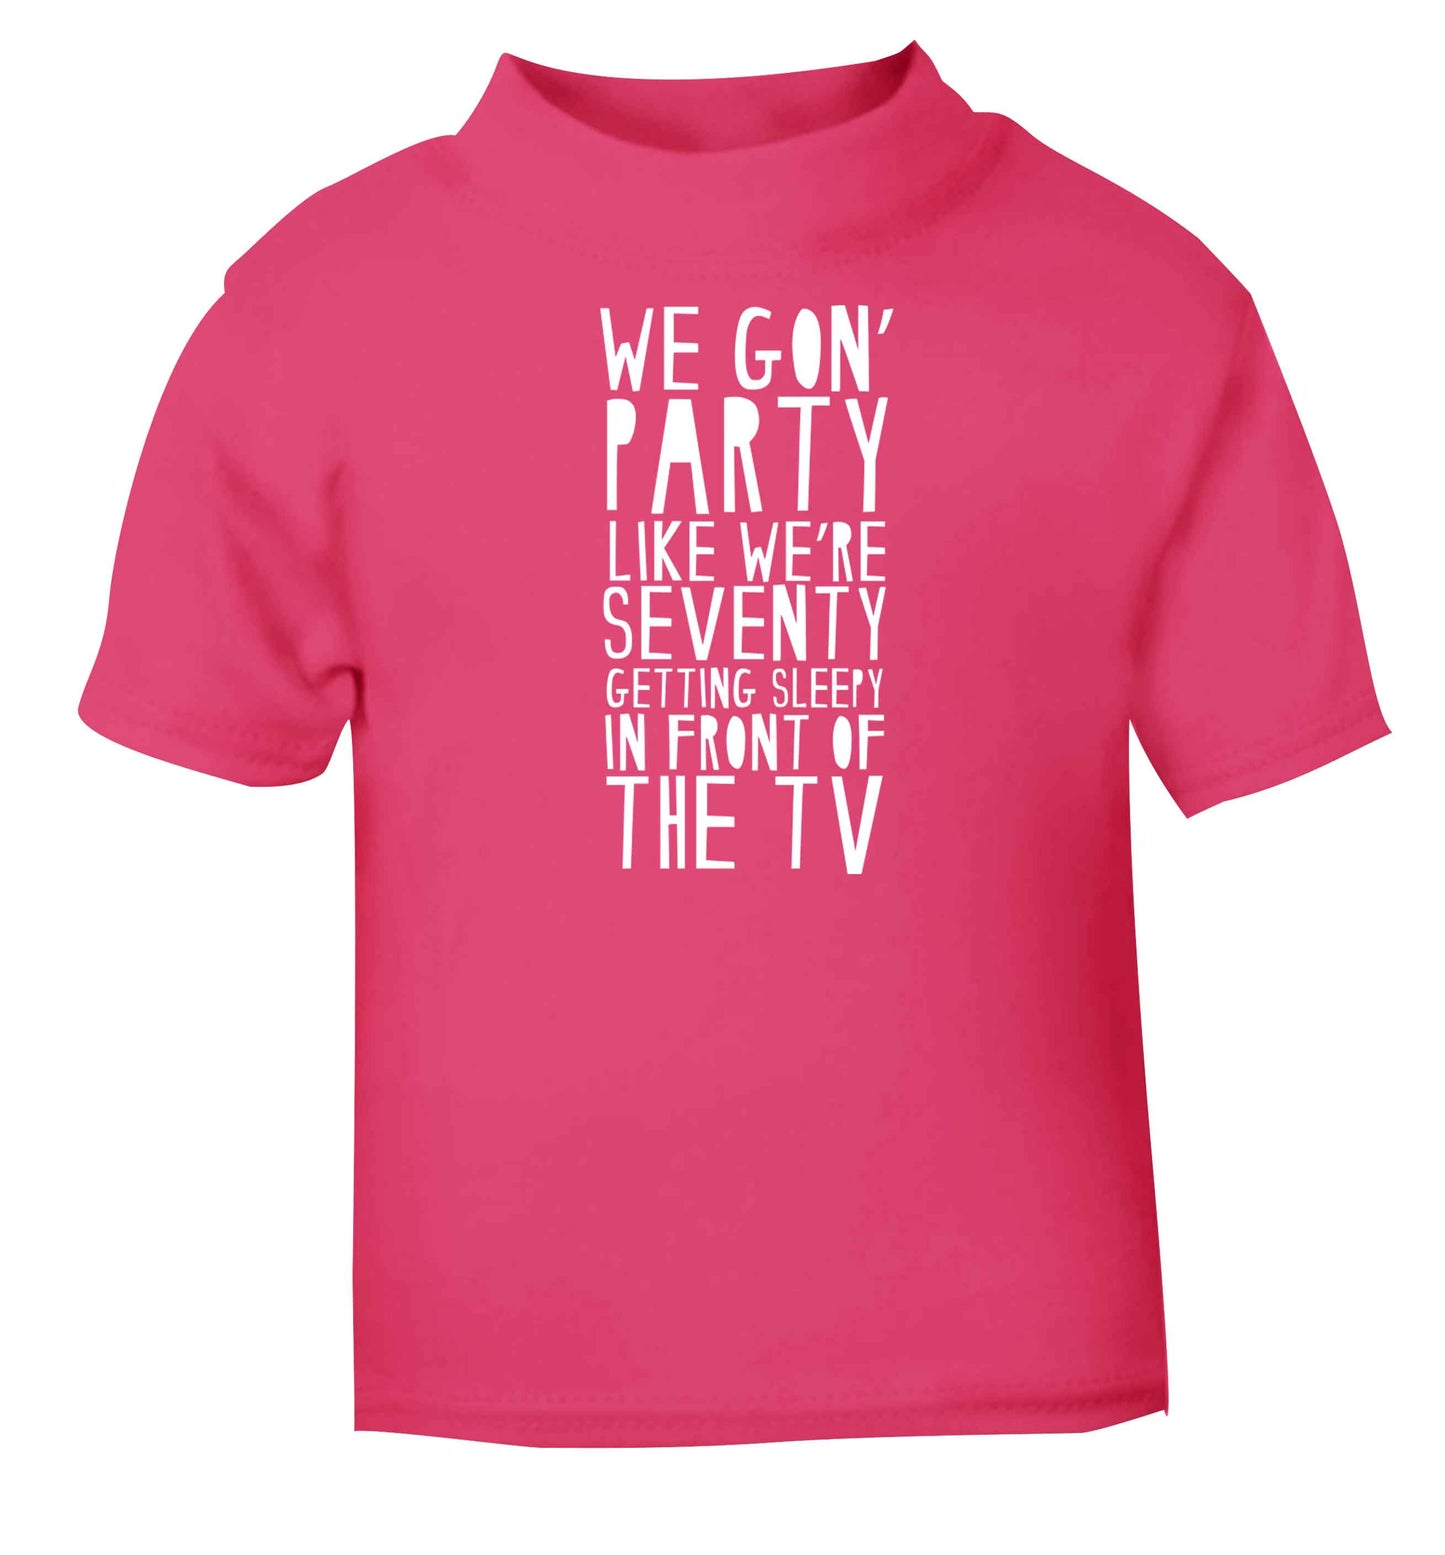 We gon' party like we're seventy getting sleepy in front of the TV pink baby toddler Tshirt 2 Years